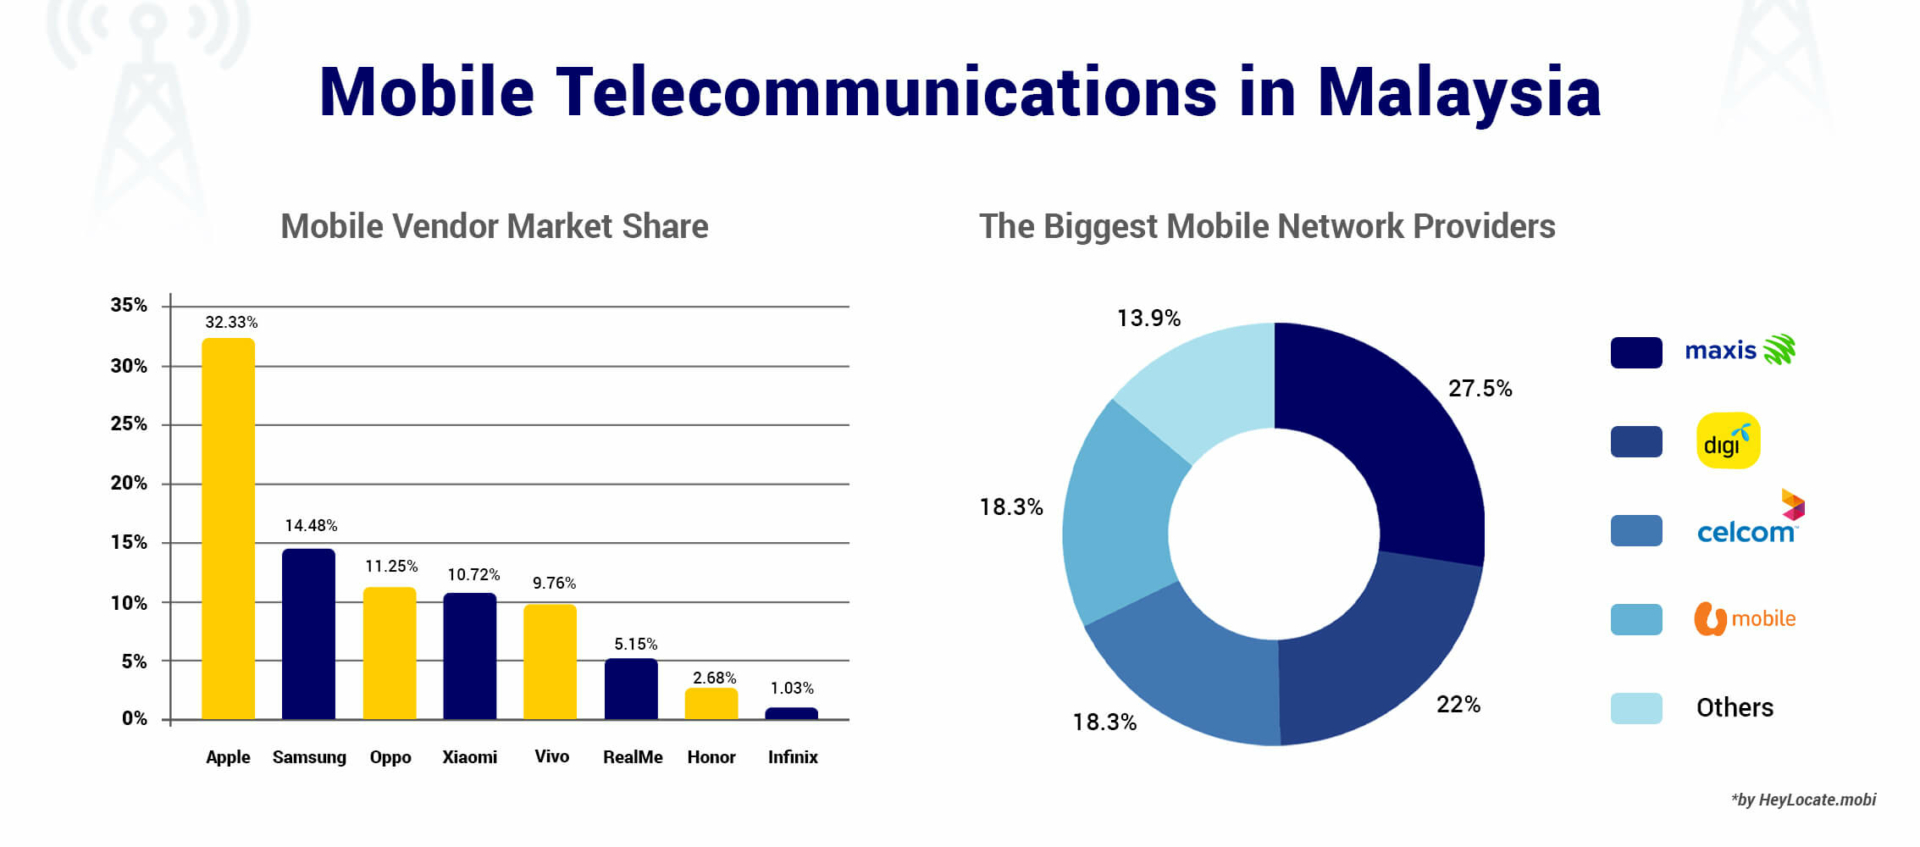 An infographic depicting mobile telecommunications in Malaysia, including mobile vendor market share and popular network operators 